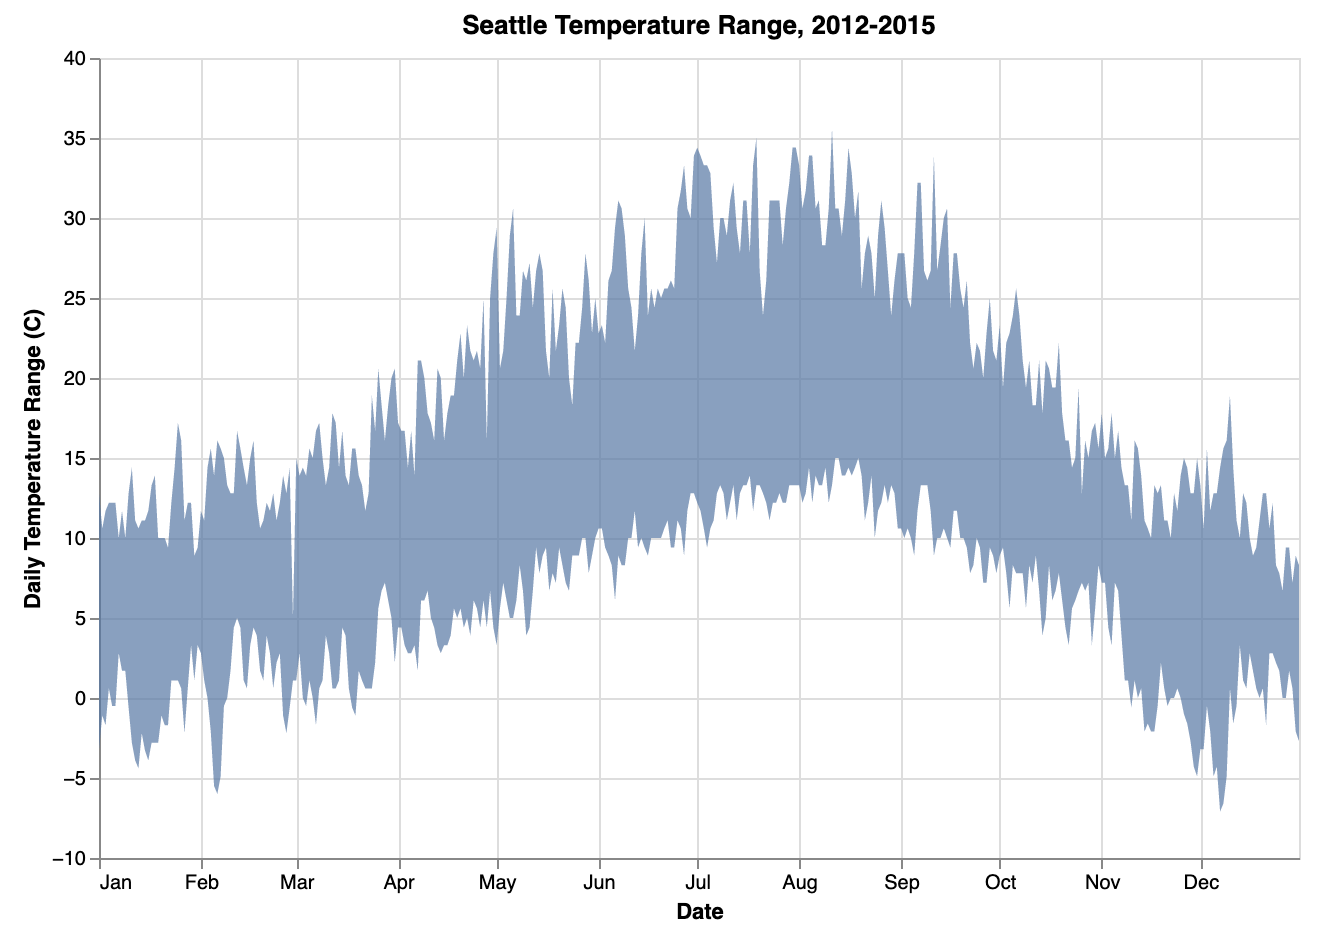 An area chart showing the daily minimum and maximum temperatures in Seattle over a period of 1 year